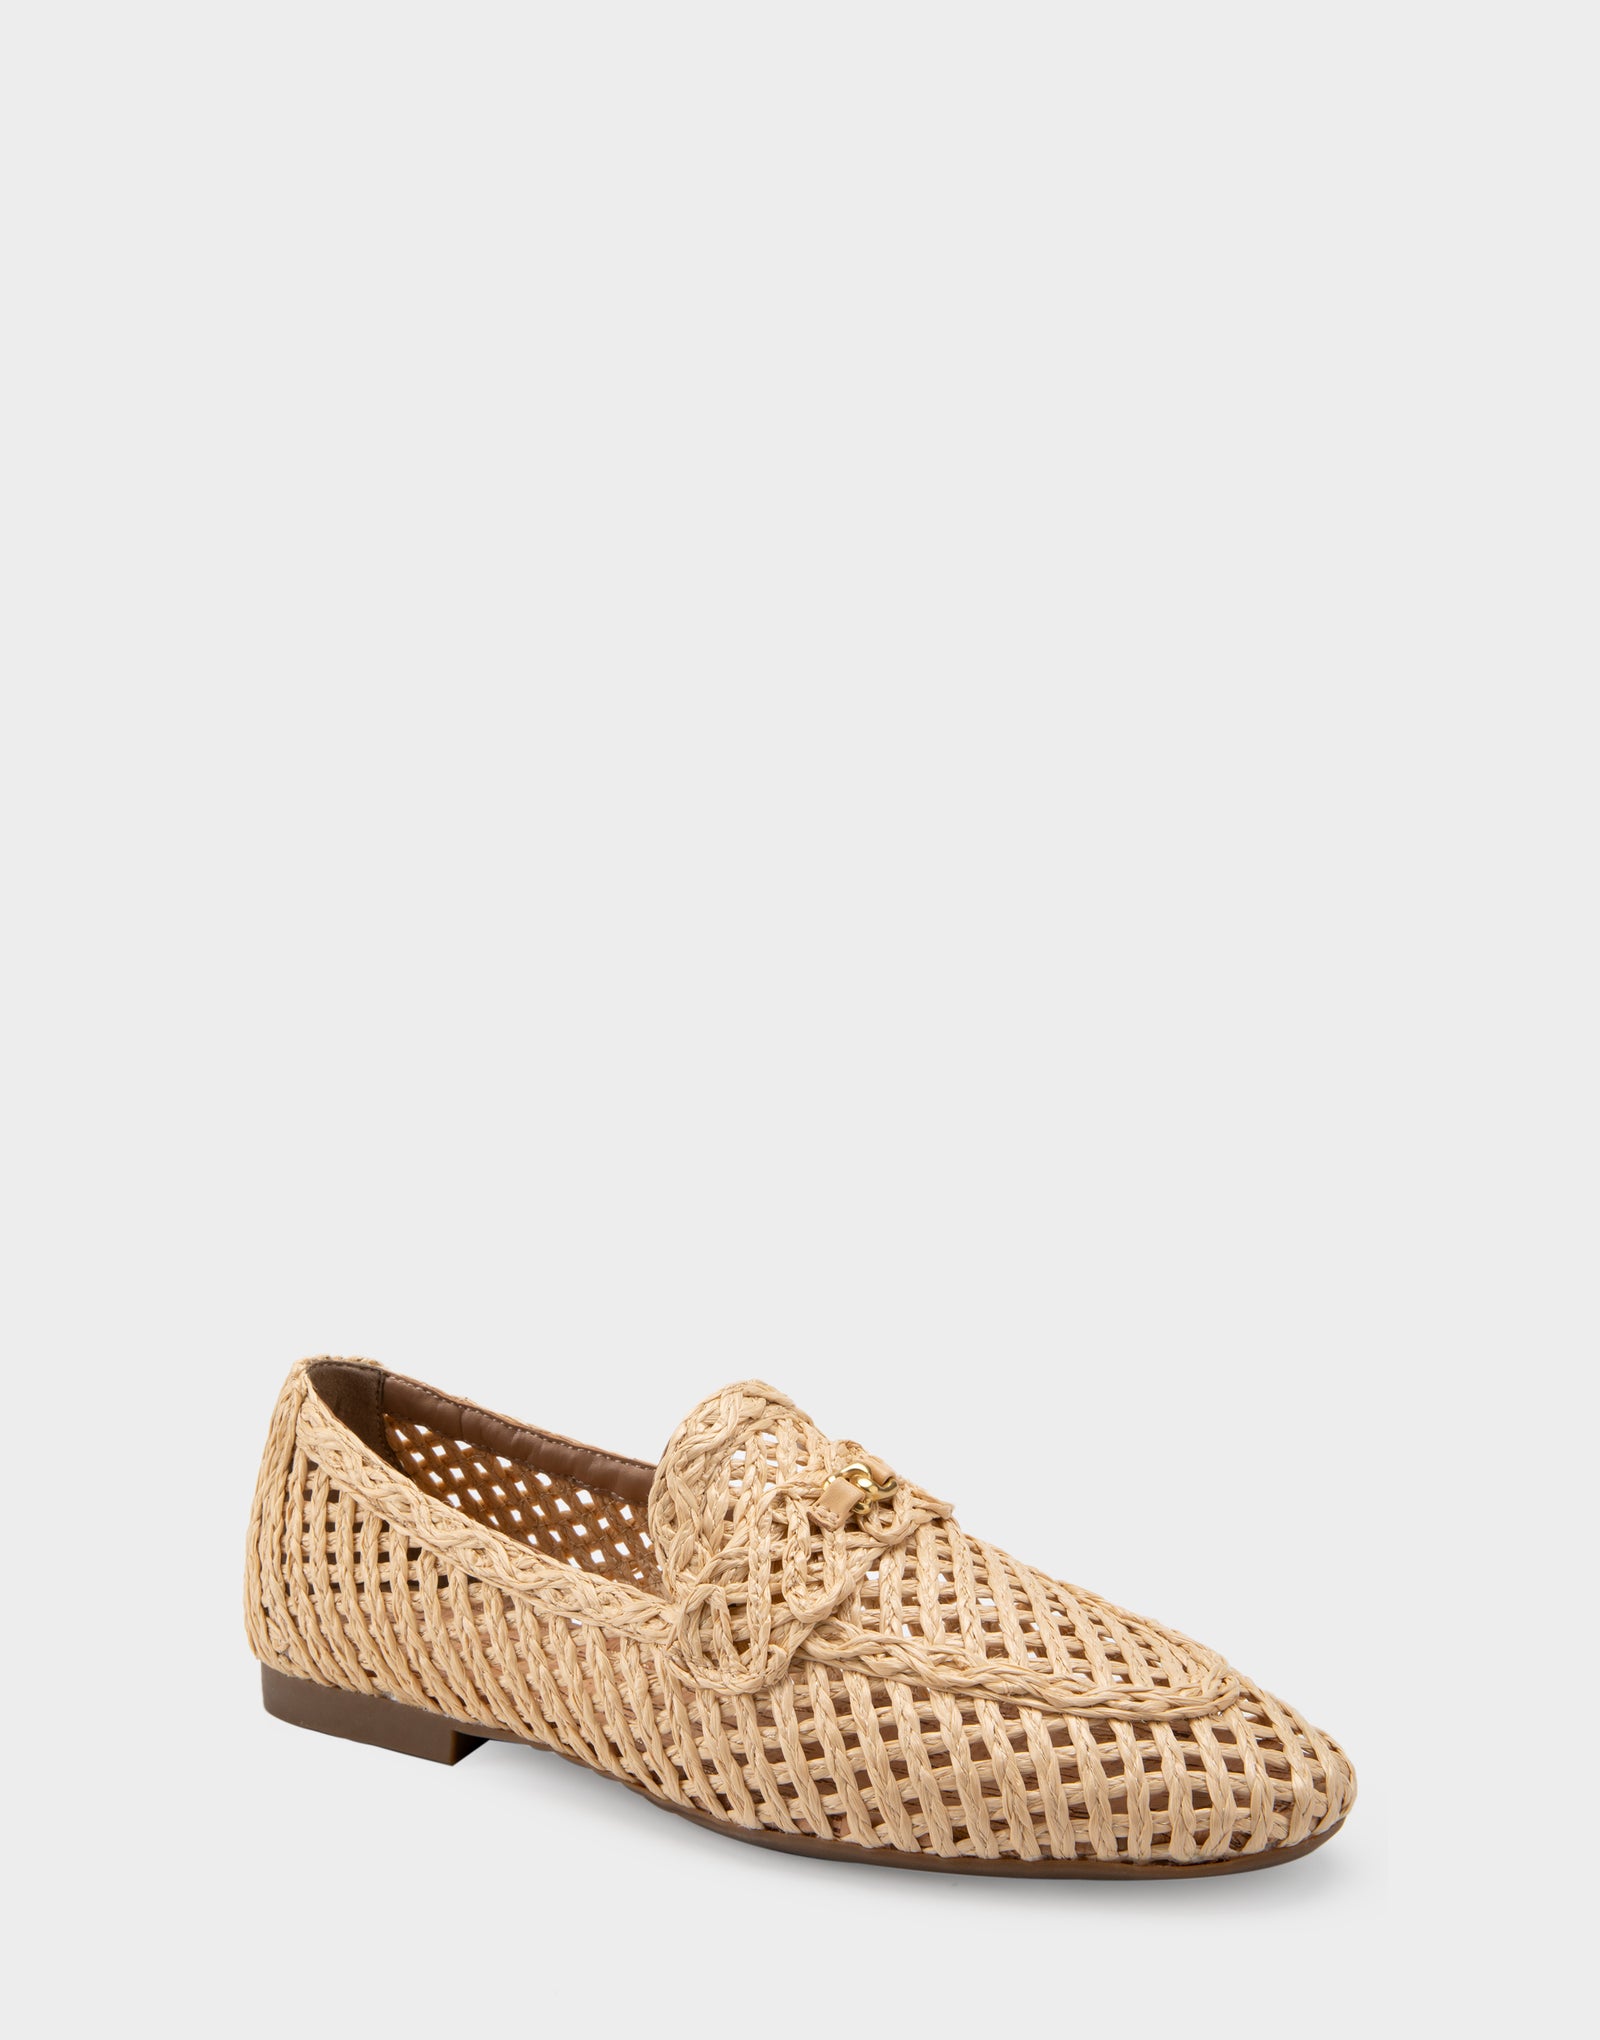 Women's Loafer in Natural